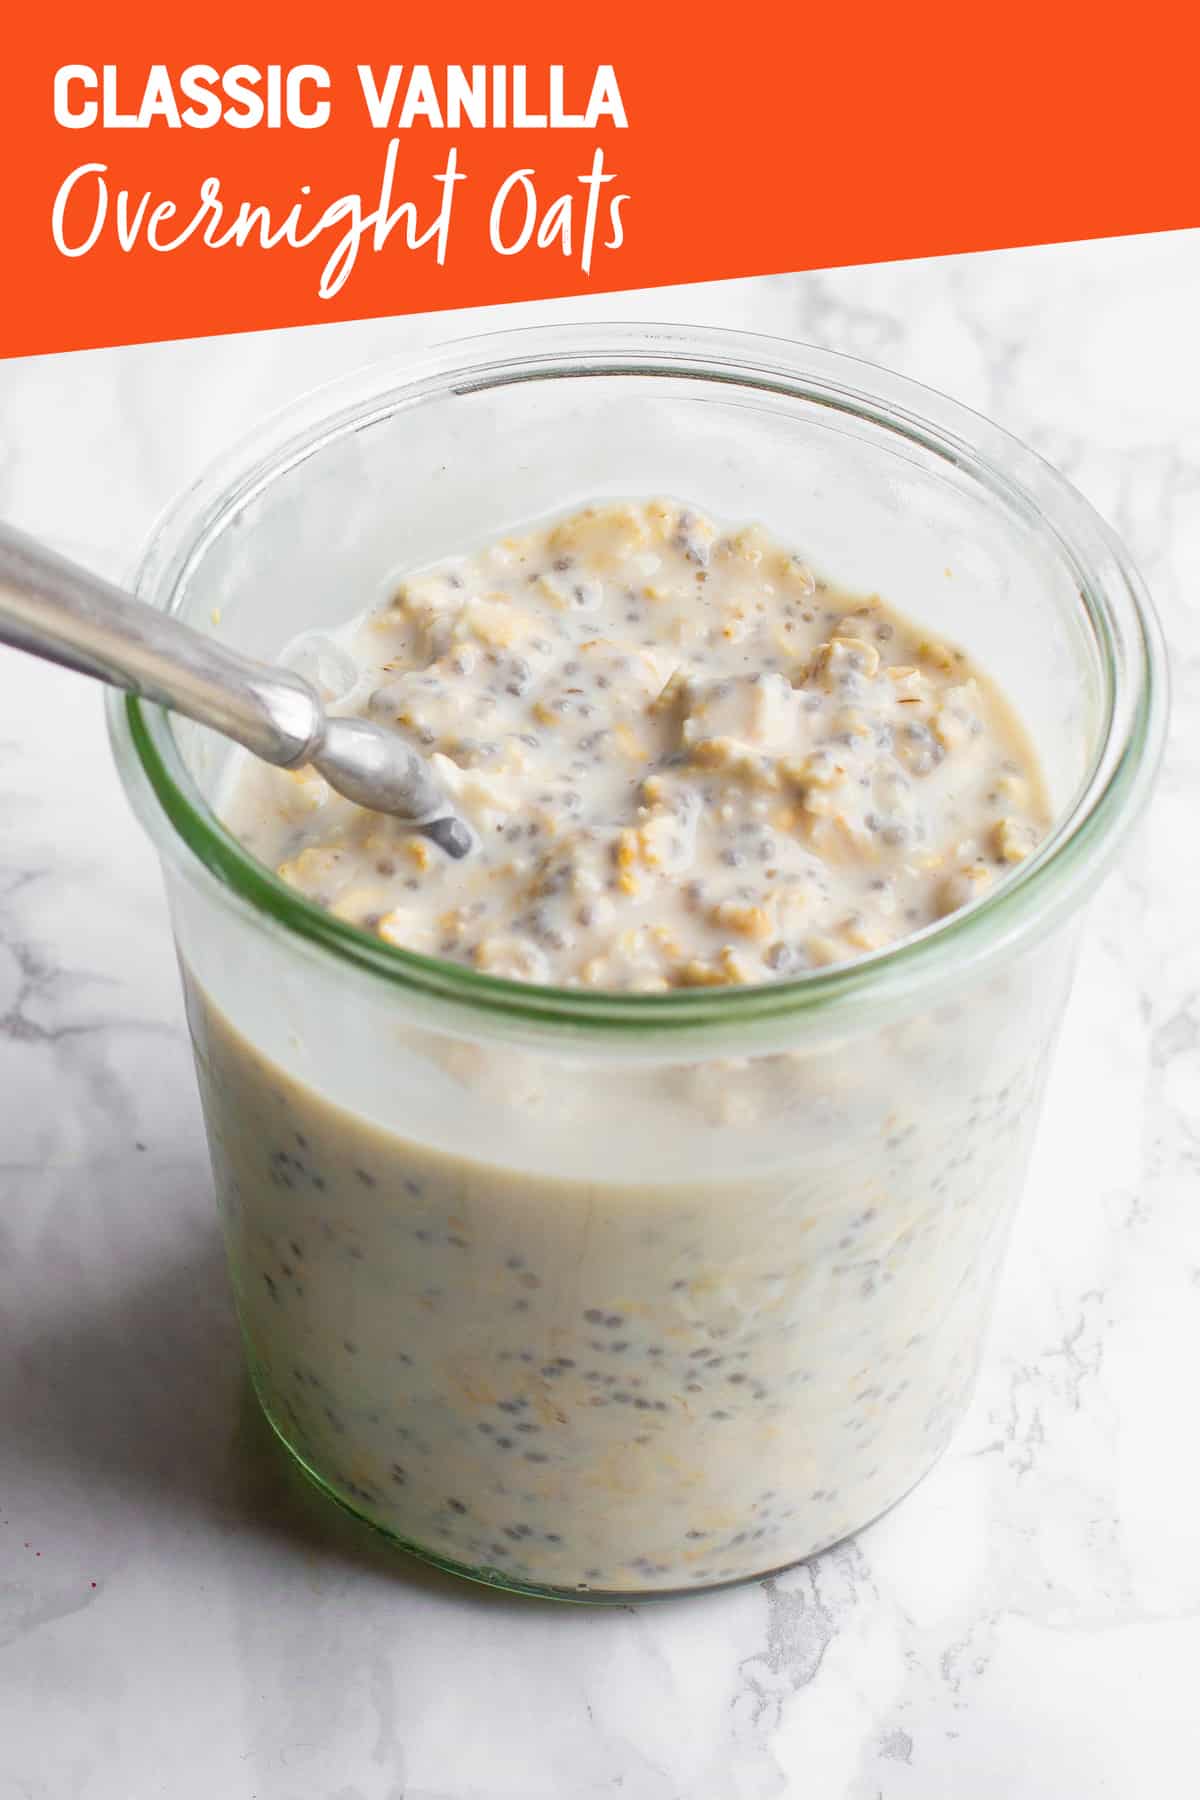 A clear glass jar filled with overnight oats, with a spoon sticking out. A text overlay reads "Classic Vanilla Overnight Oats."